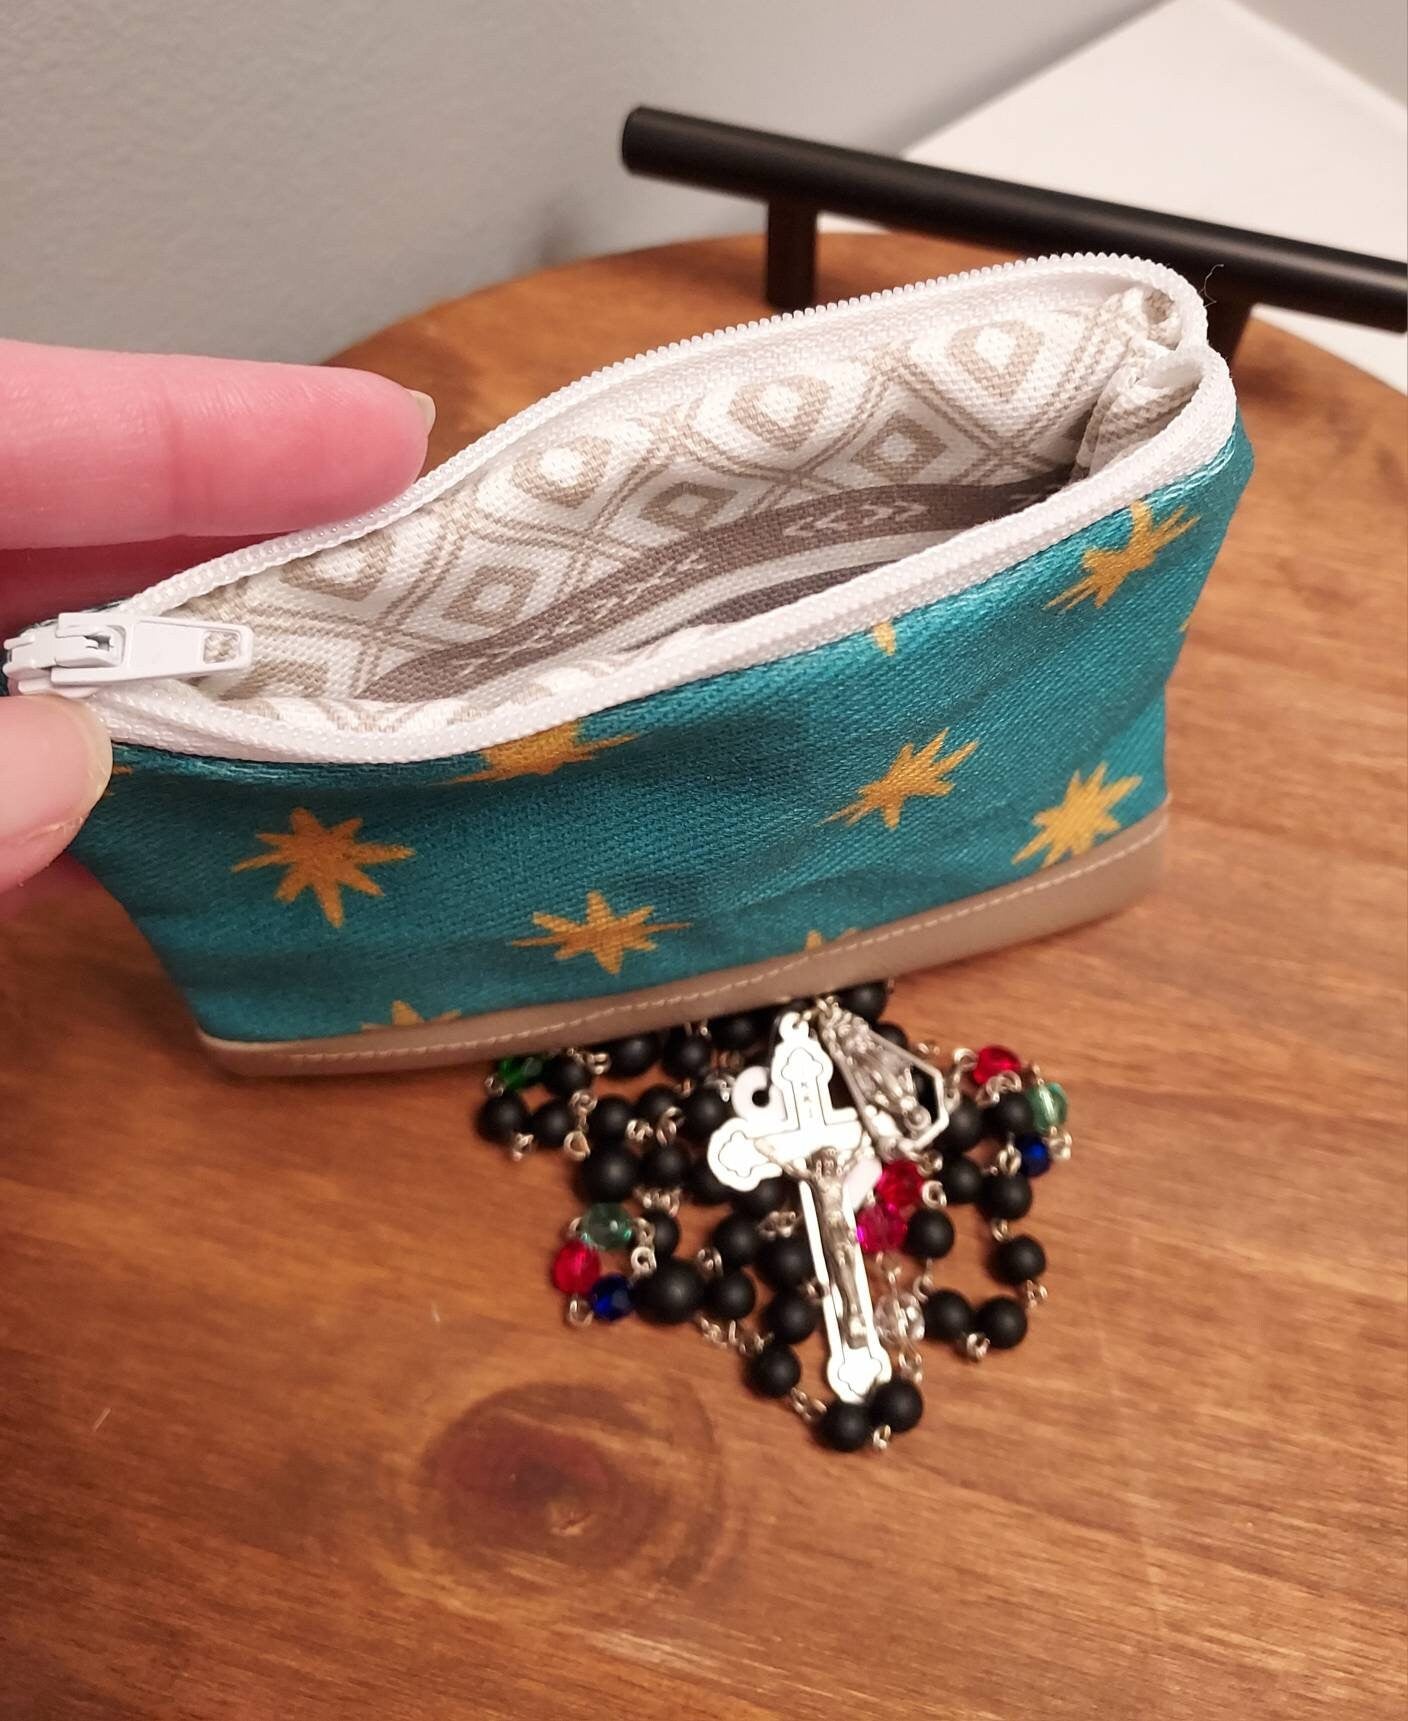 Wallet Our Lady of Guadalupe Catholic fabric Limited Edition Christian Confirmation Mass First Communion Bible purse